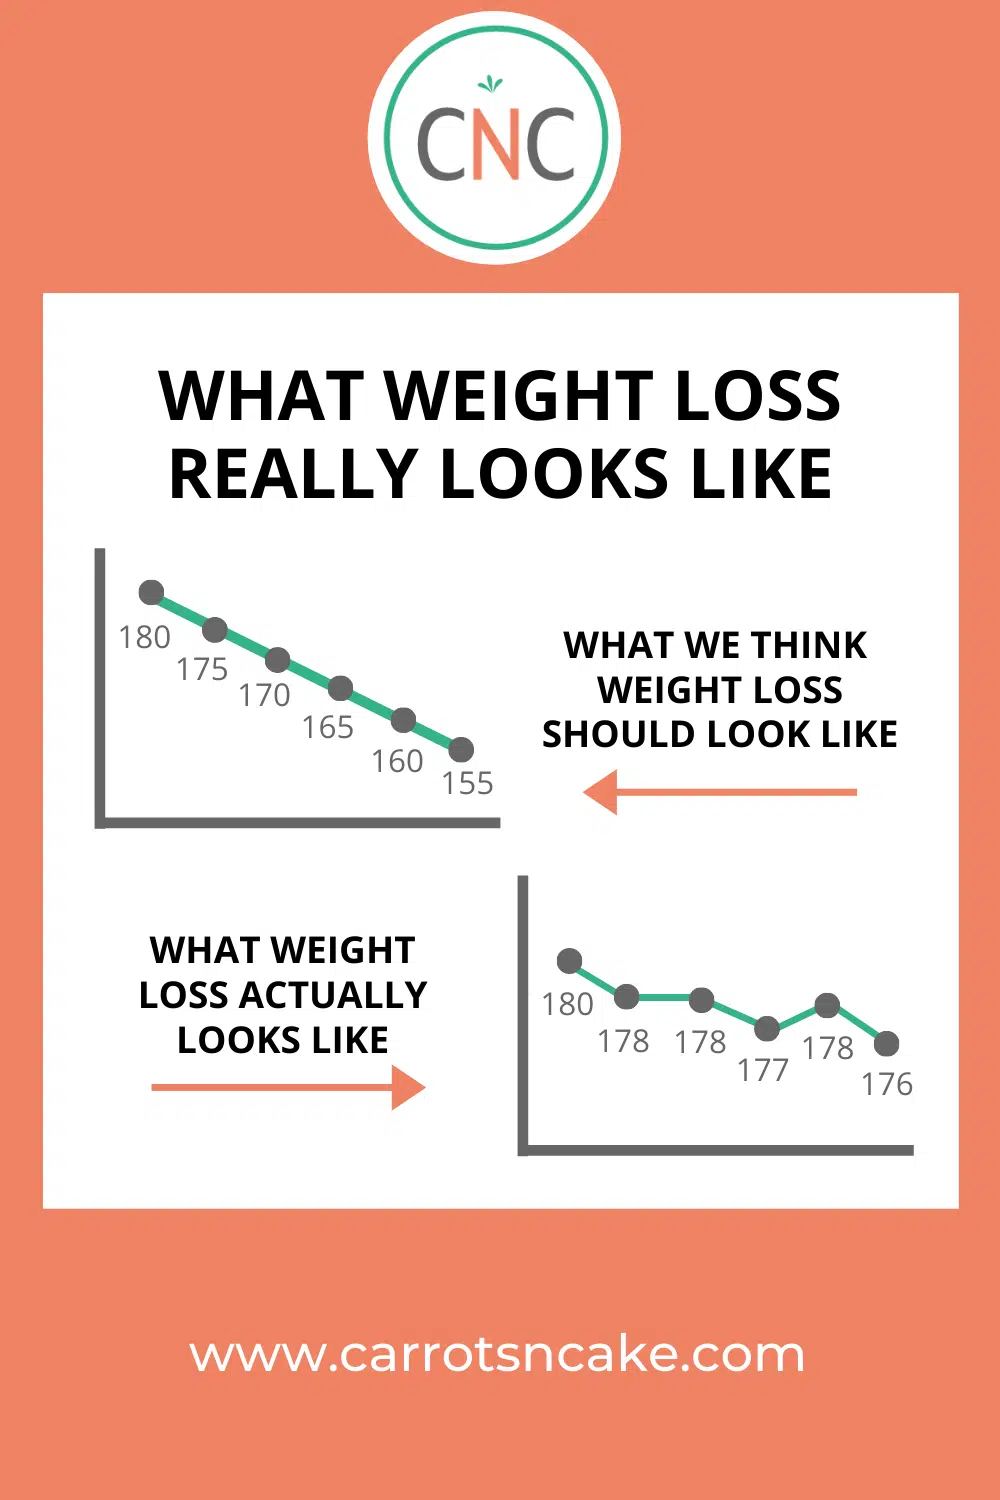 WHAT WEIGHT LOSS REALLY LOOKS LIKE